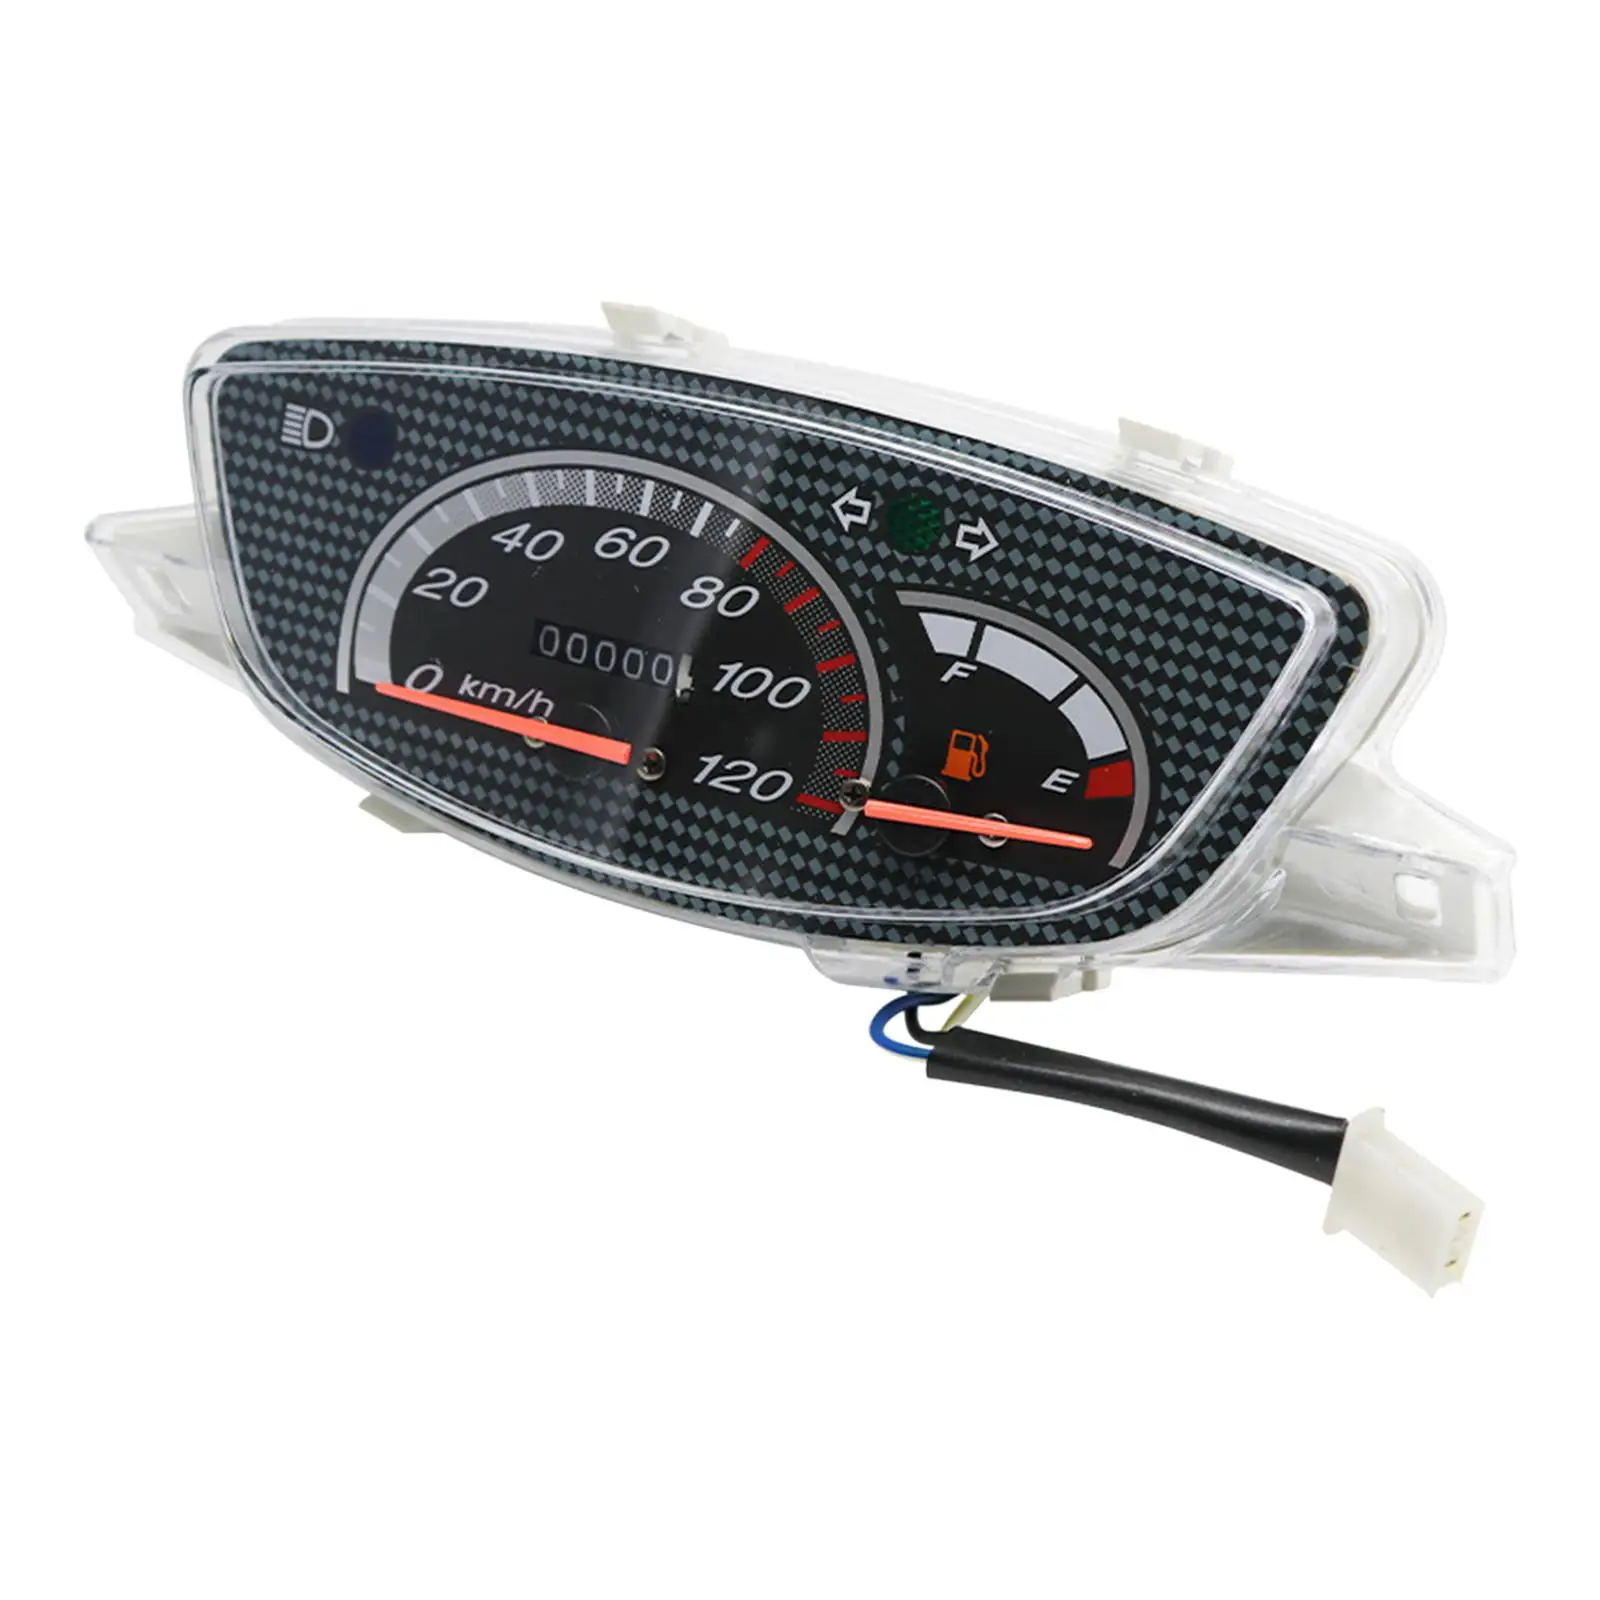 ABS Plastic Motorcycle Speedometer Assembly Instrument Black Odometer for Honda Diozx AF34/AF35 Motorcycle Parts Supplies